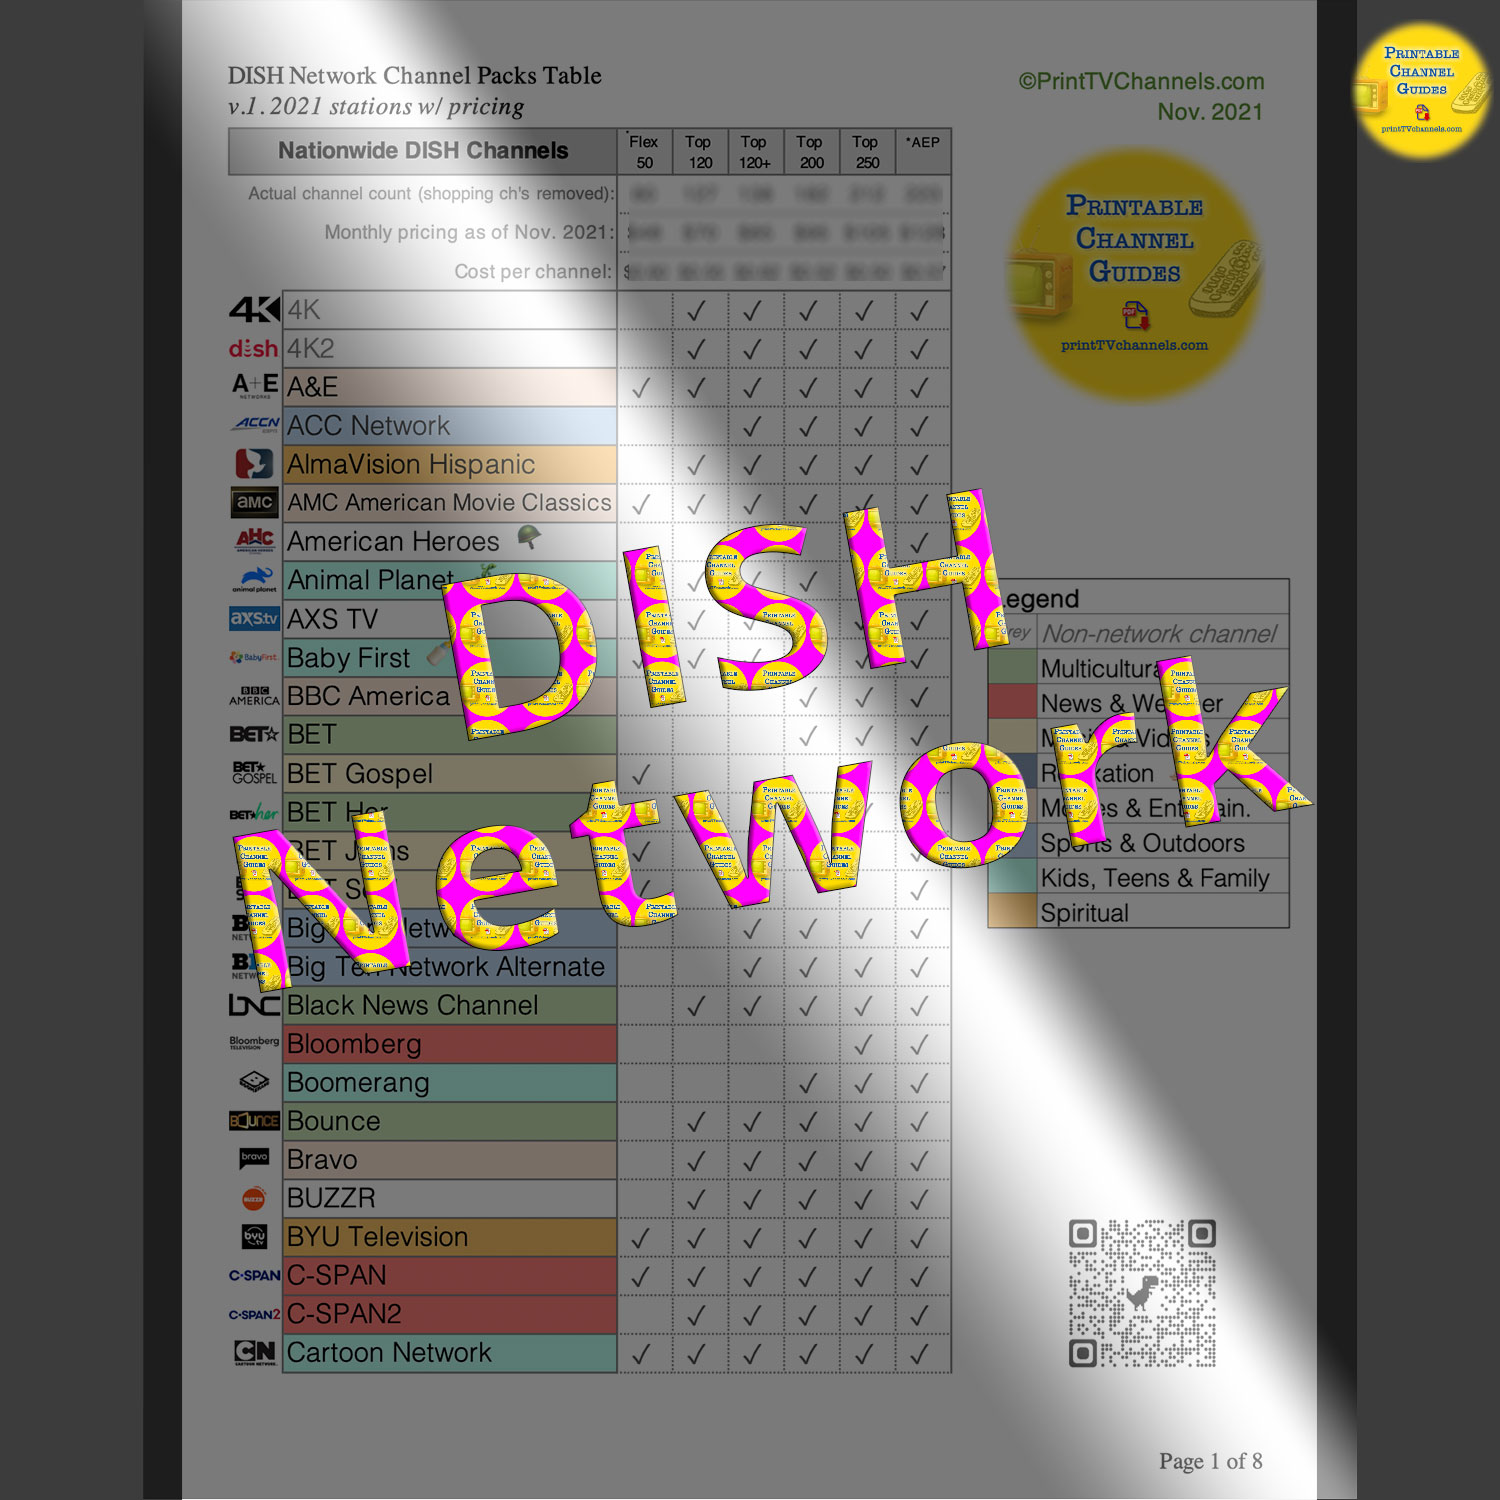 DISH Network Packages Comparison 2021 - Printable Channel Guides